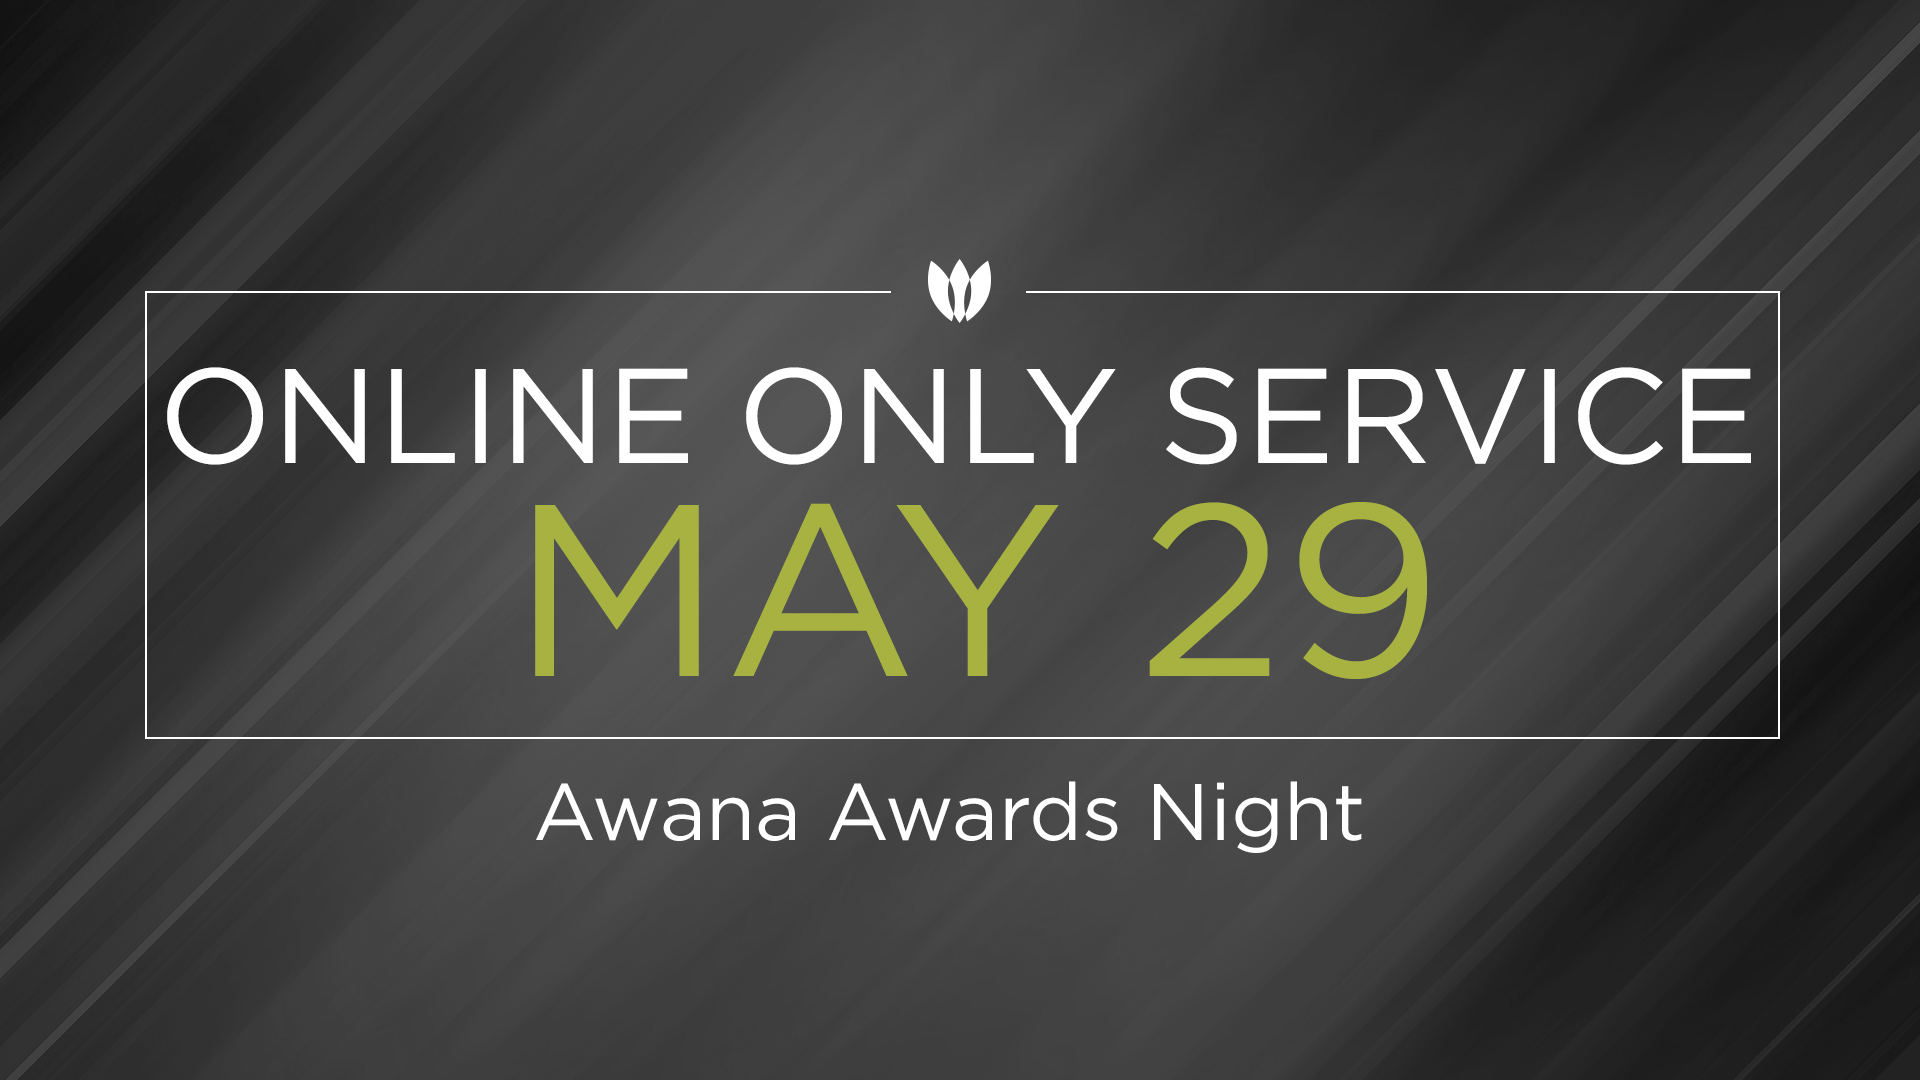 No In-Person Service May 29. Online Only